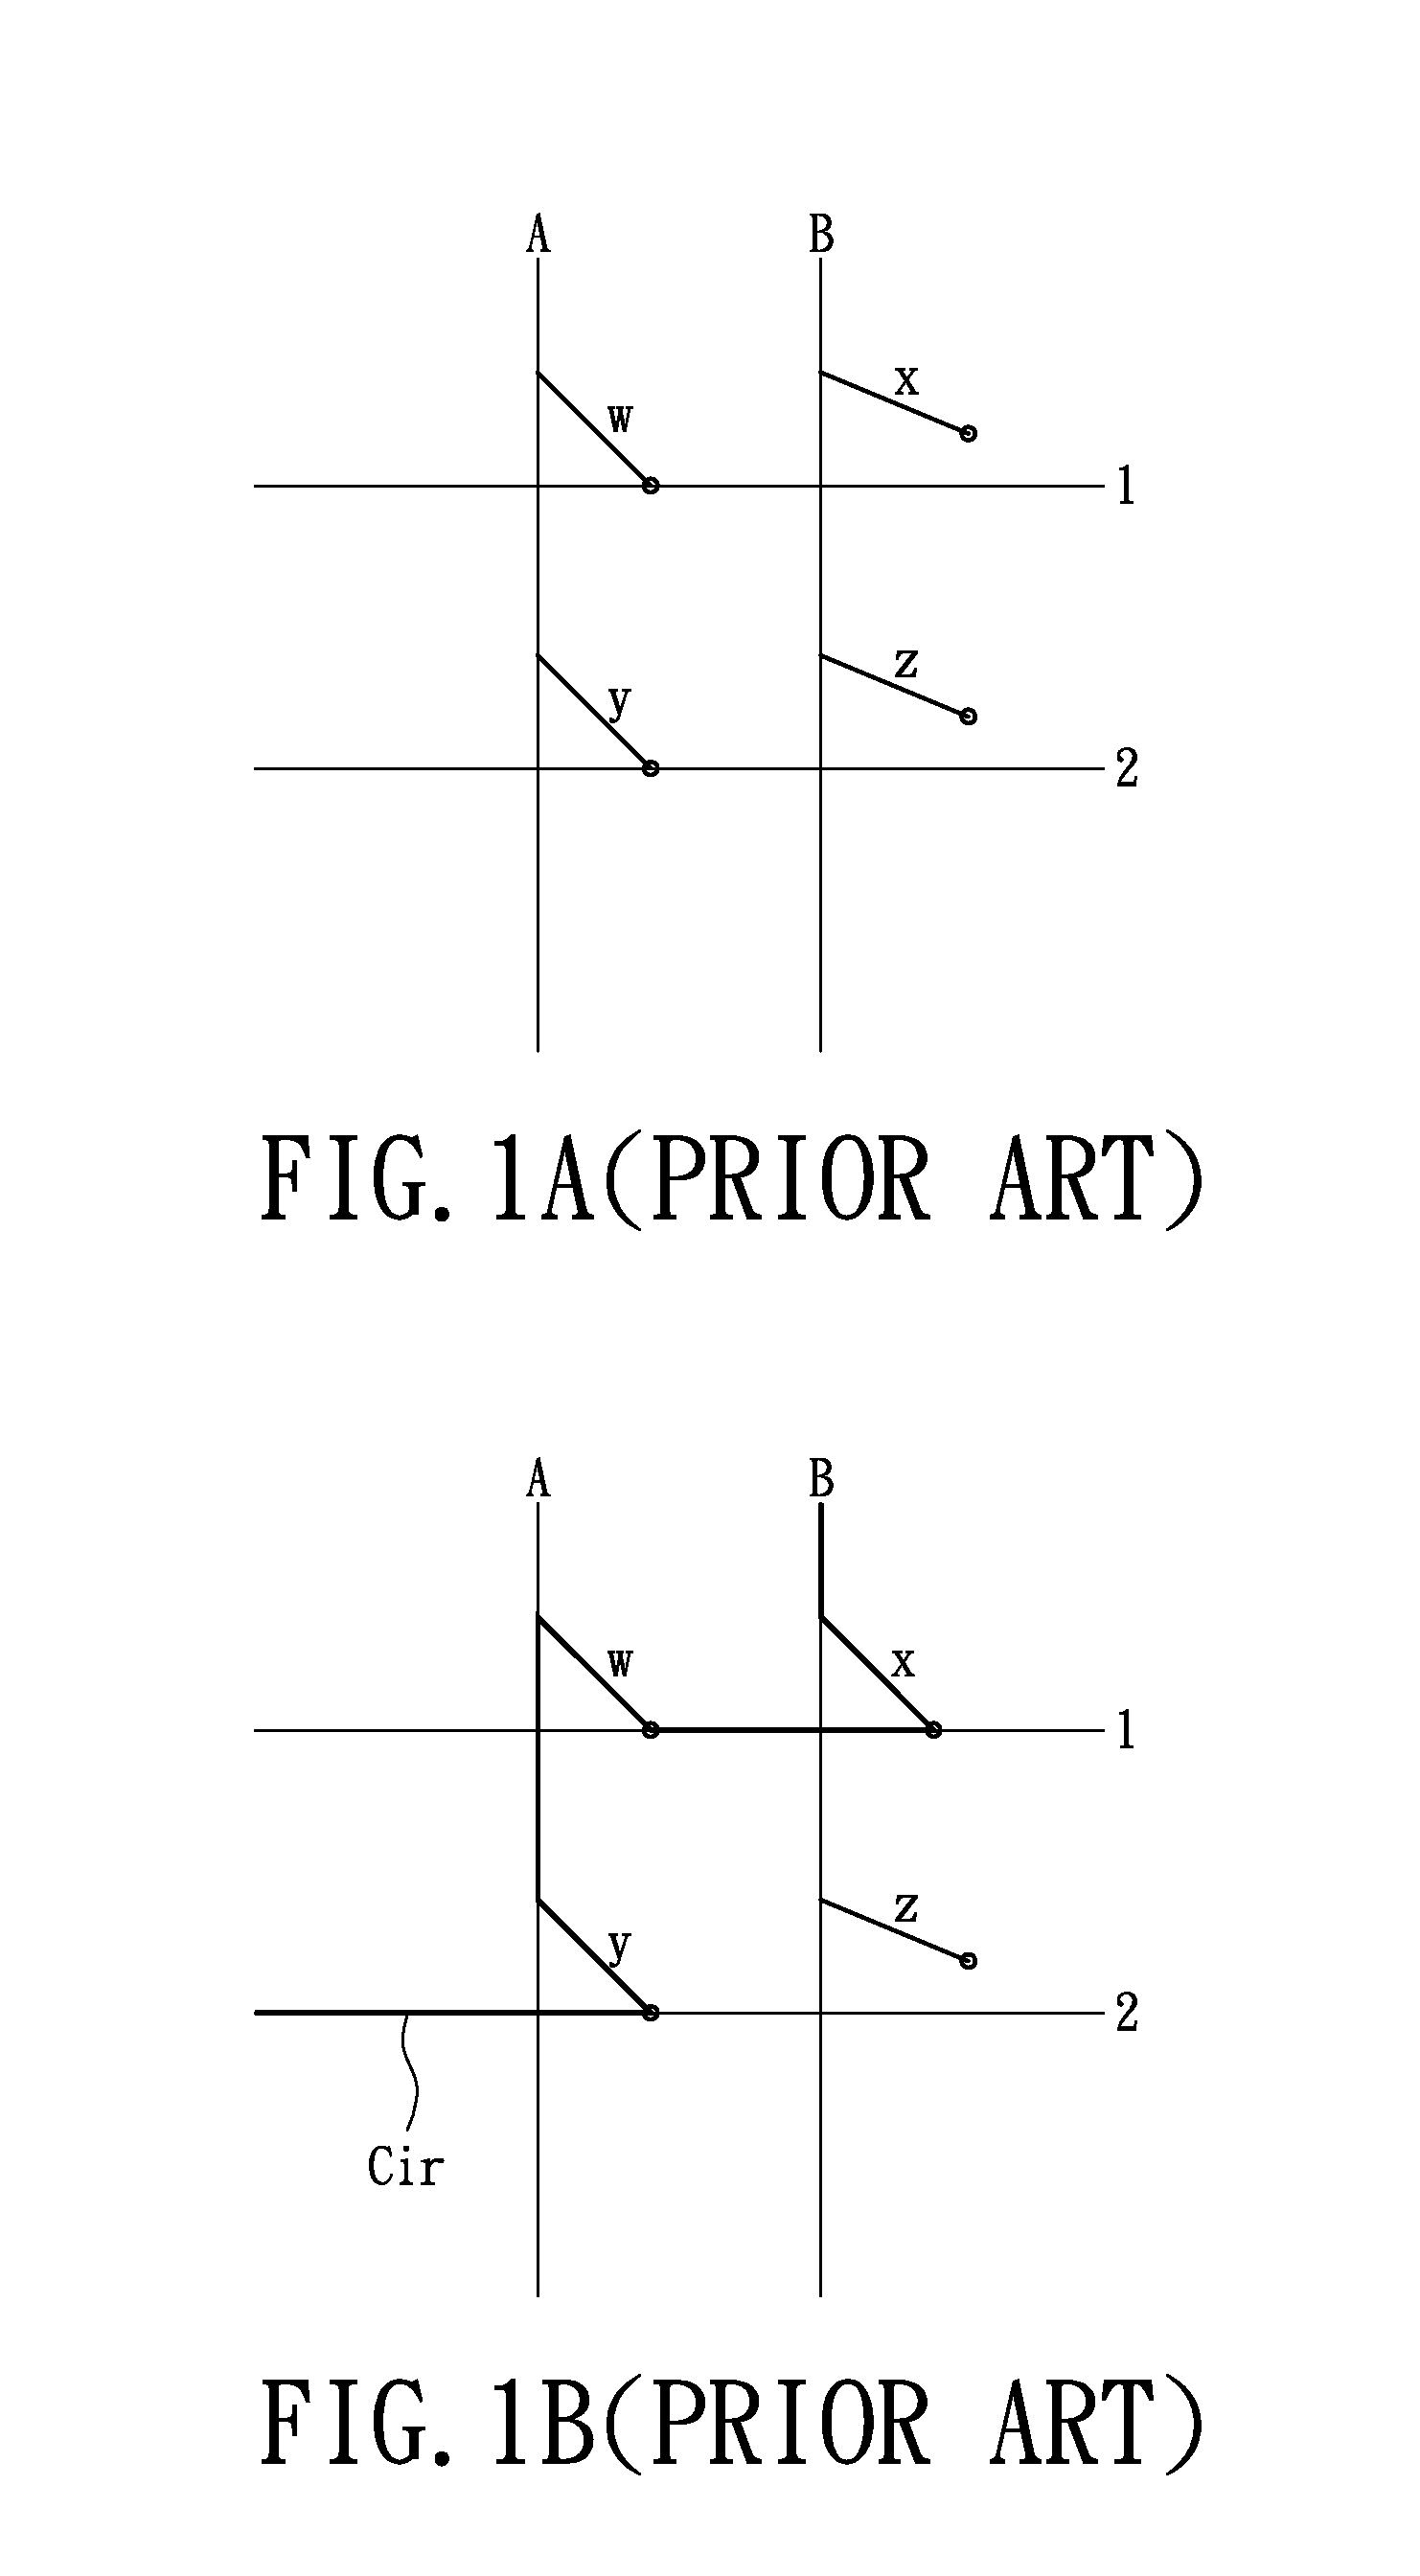 Method and system for detecting hidden ghost keys on keyboard matrix